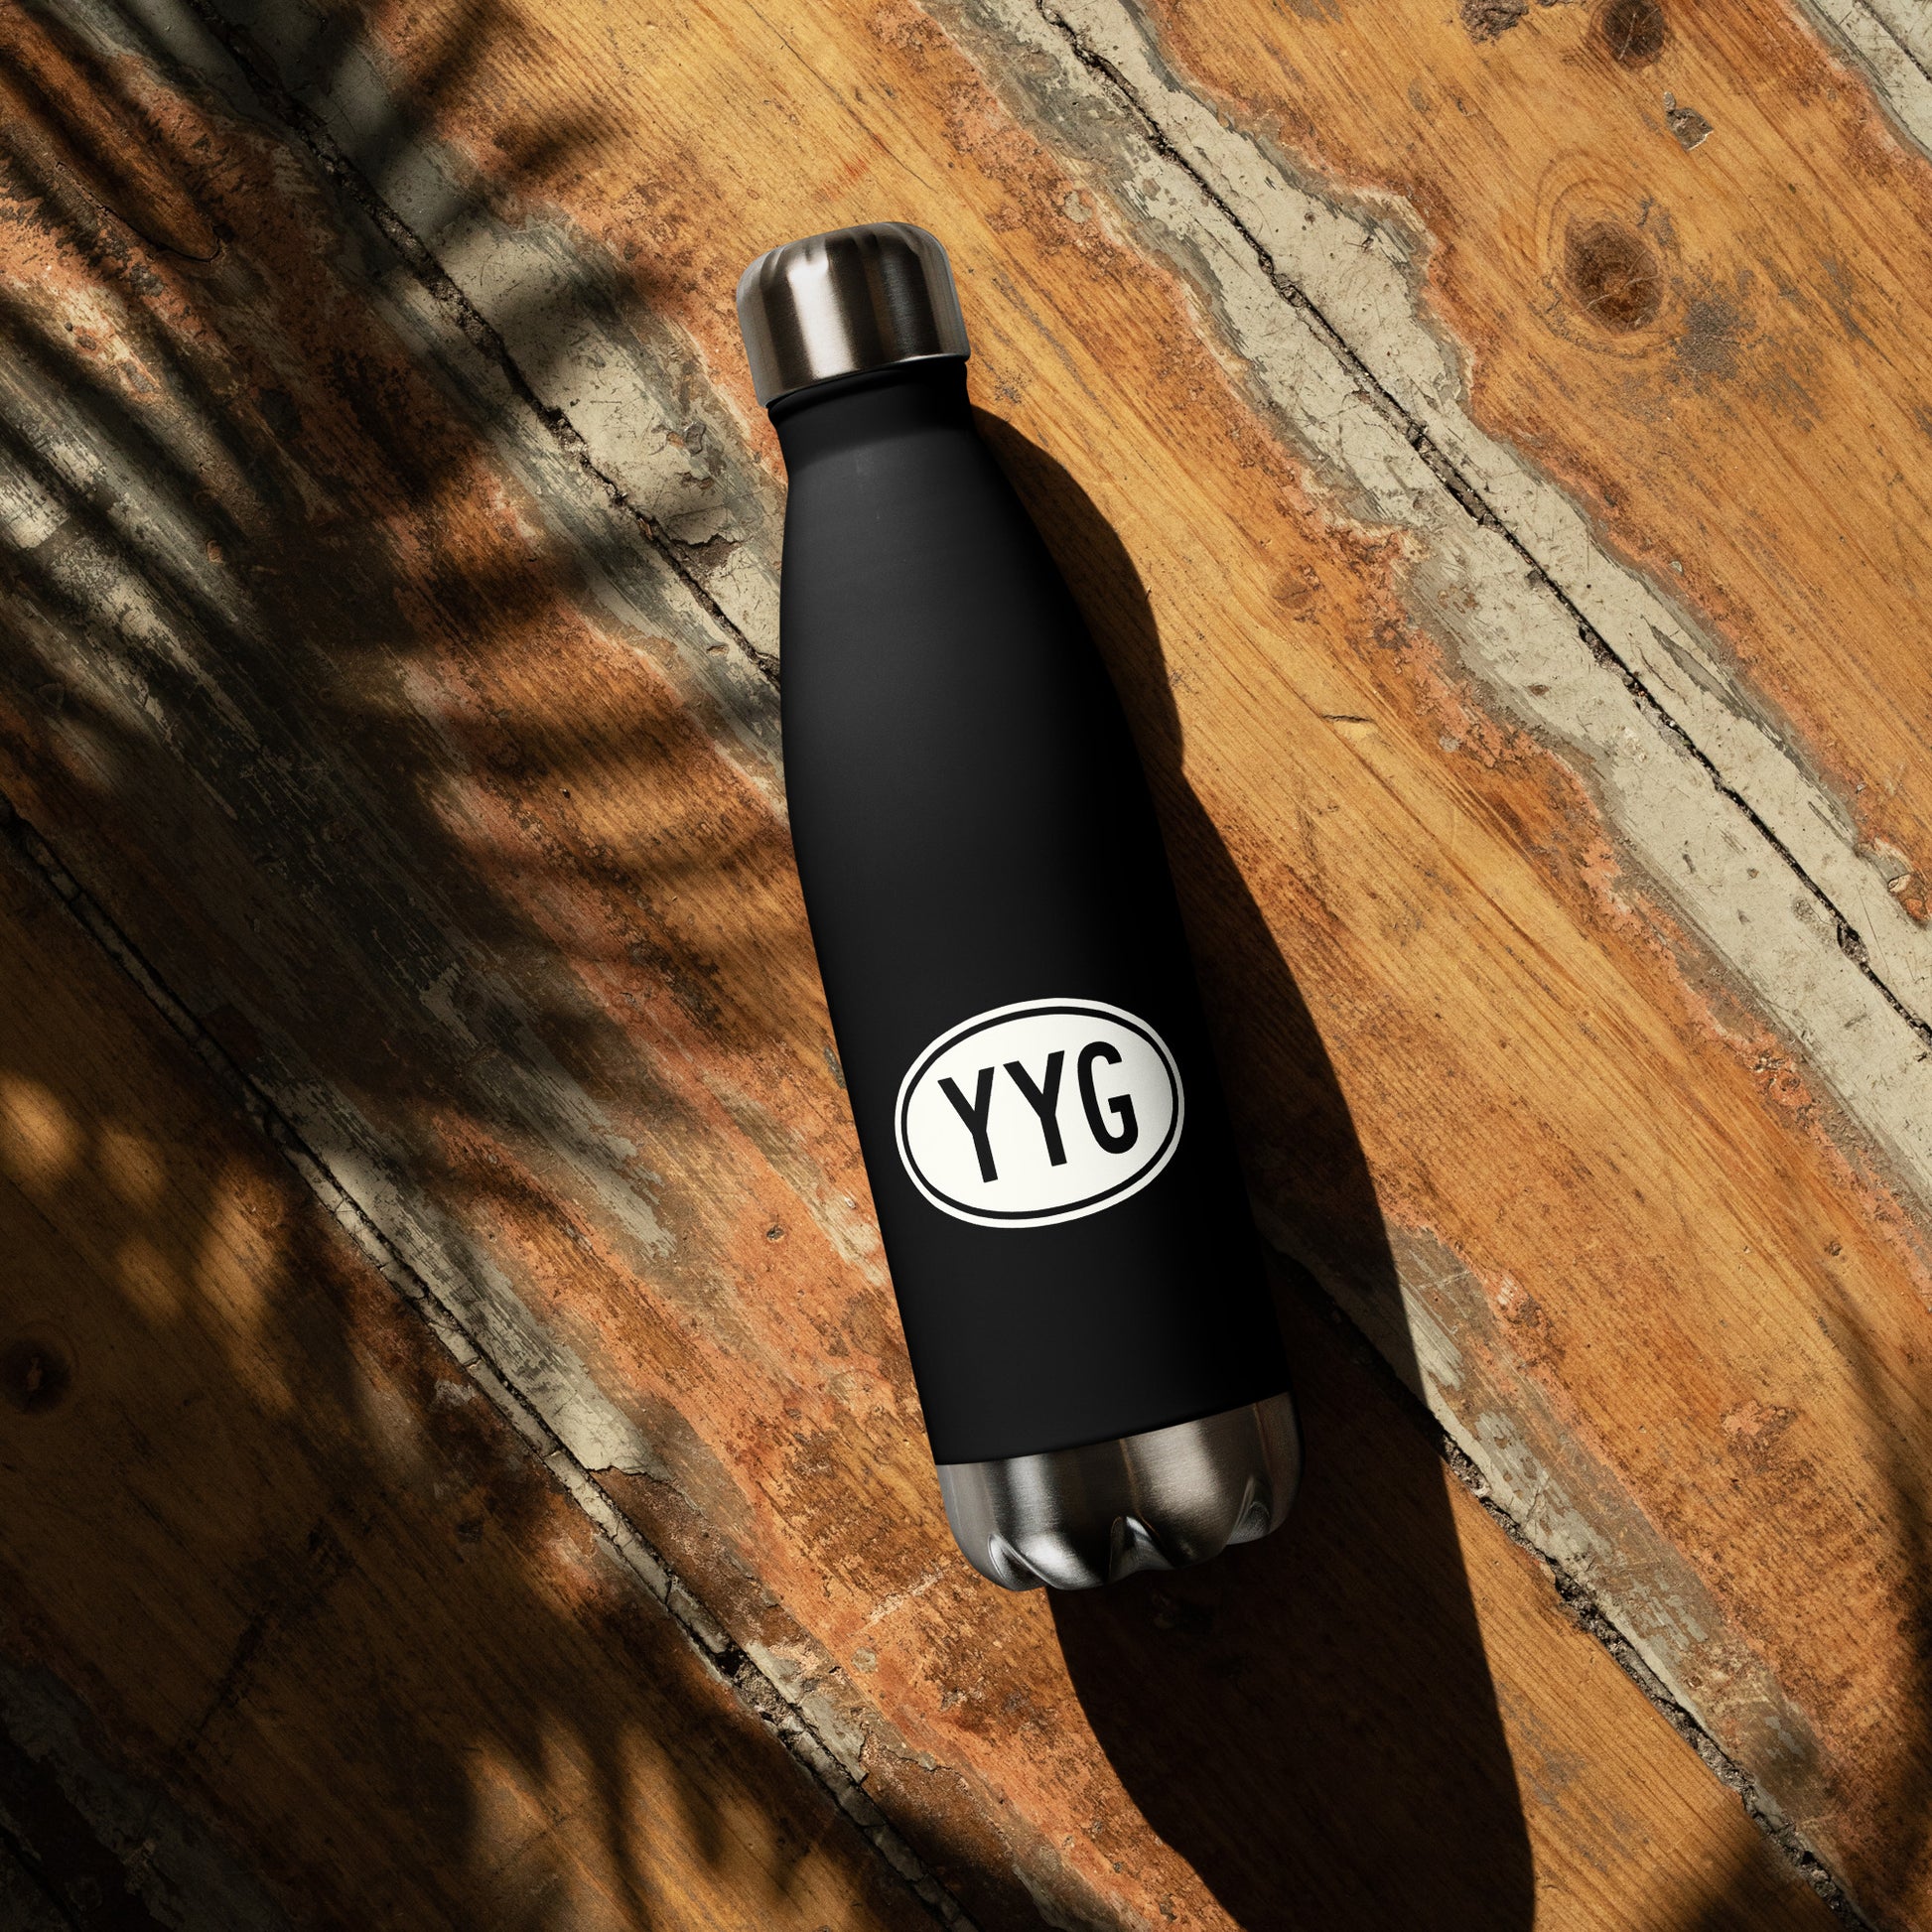 Unique Travel Gift Water Bottle - White Oval • YYG Charlottetown • YHM Designs - Image 02